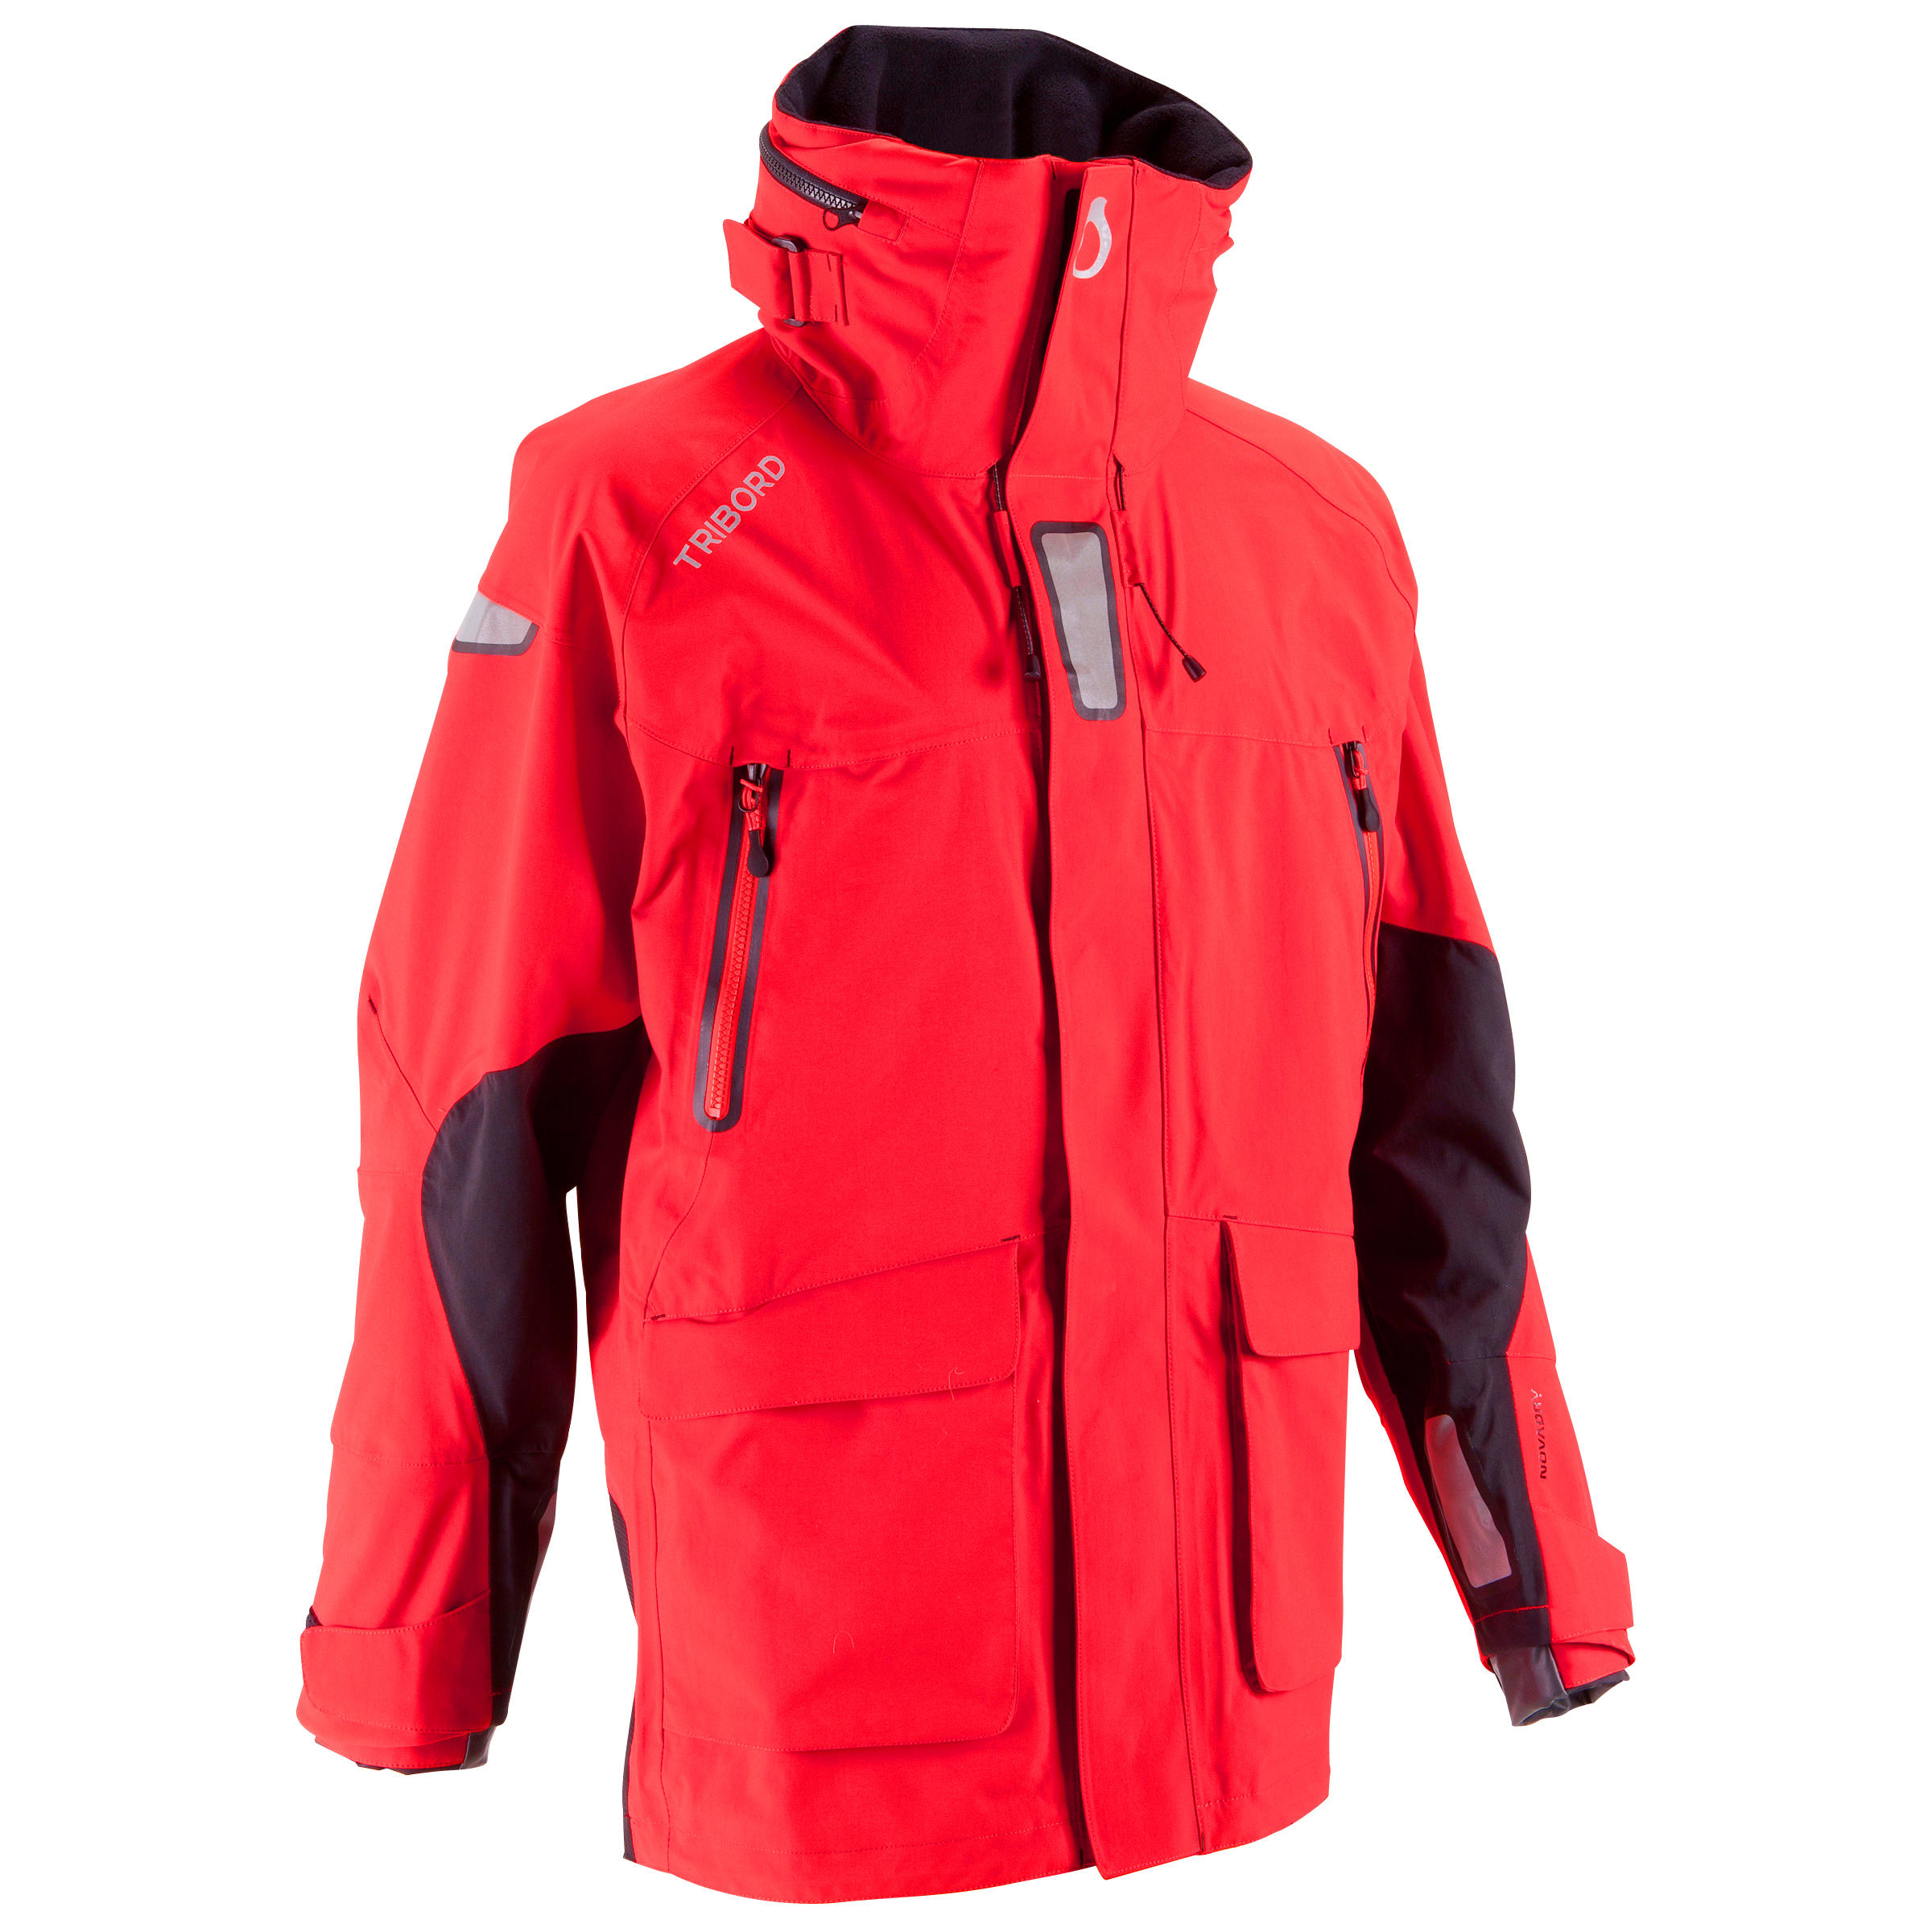 Ozean 900 Men's Waterproof and Breathable Sailing Jacket - Red 1/44